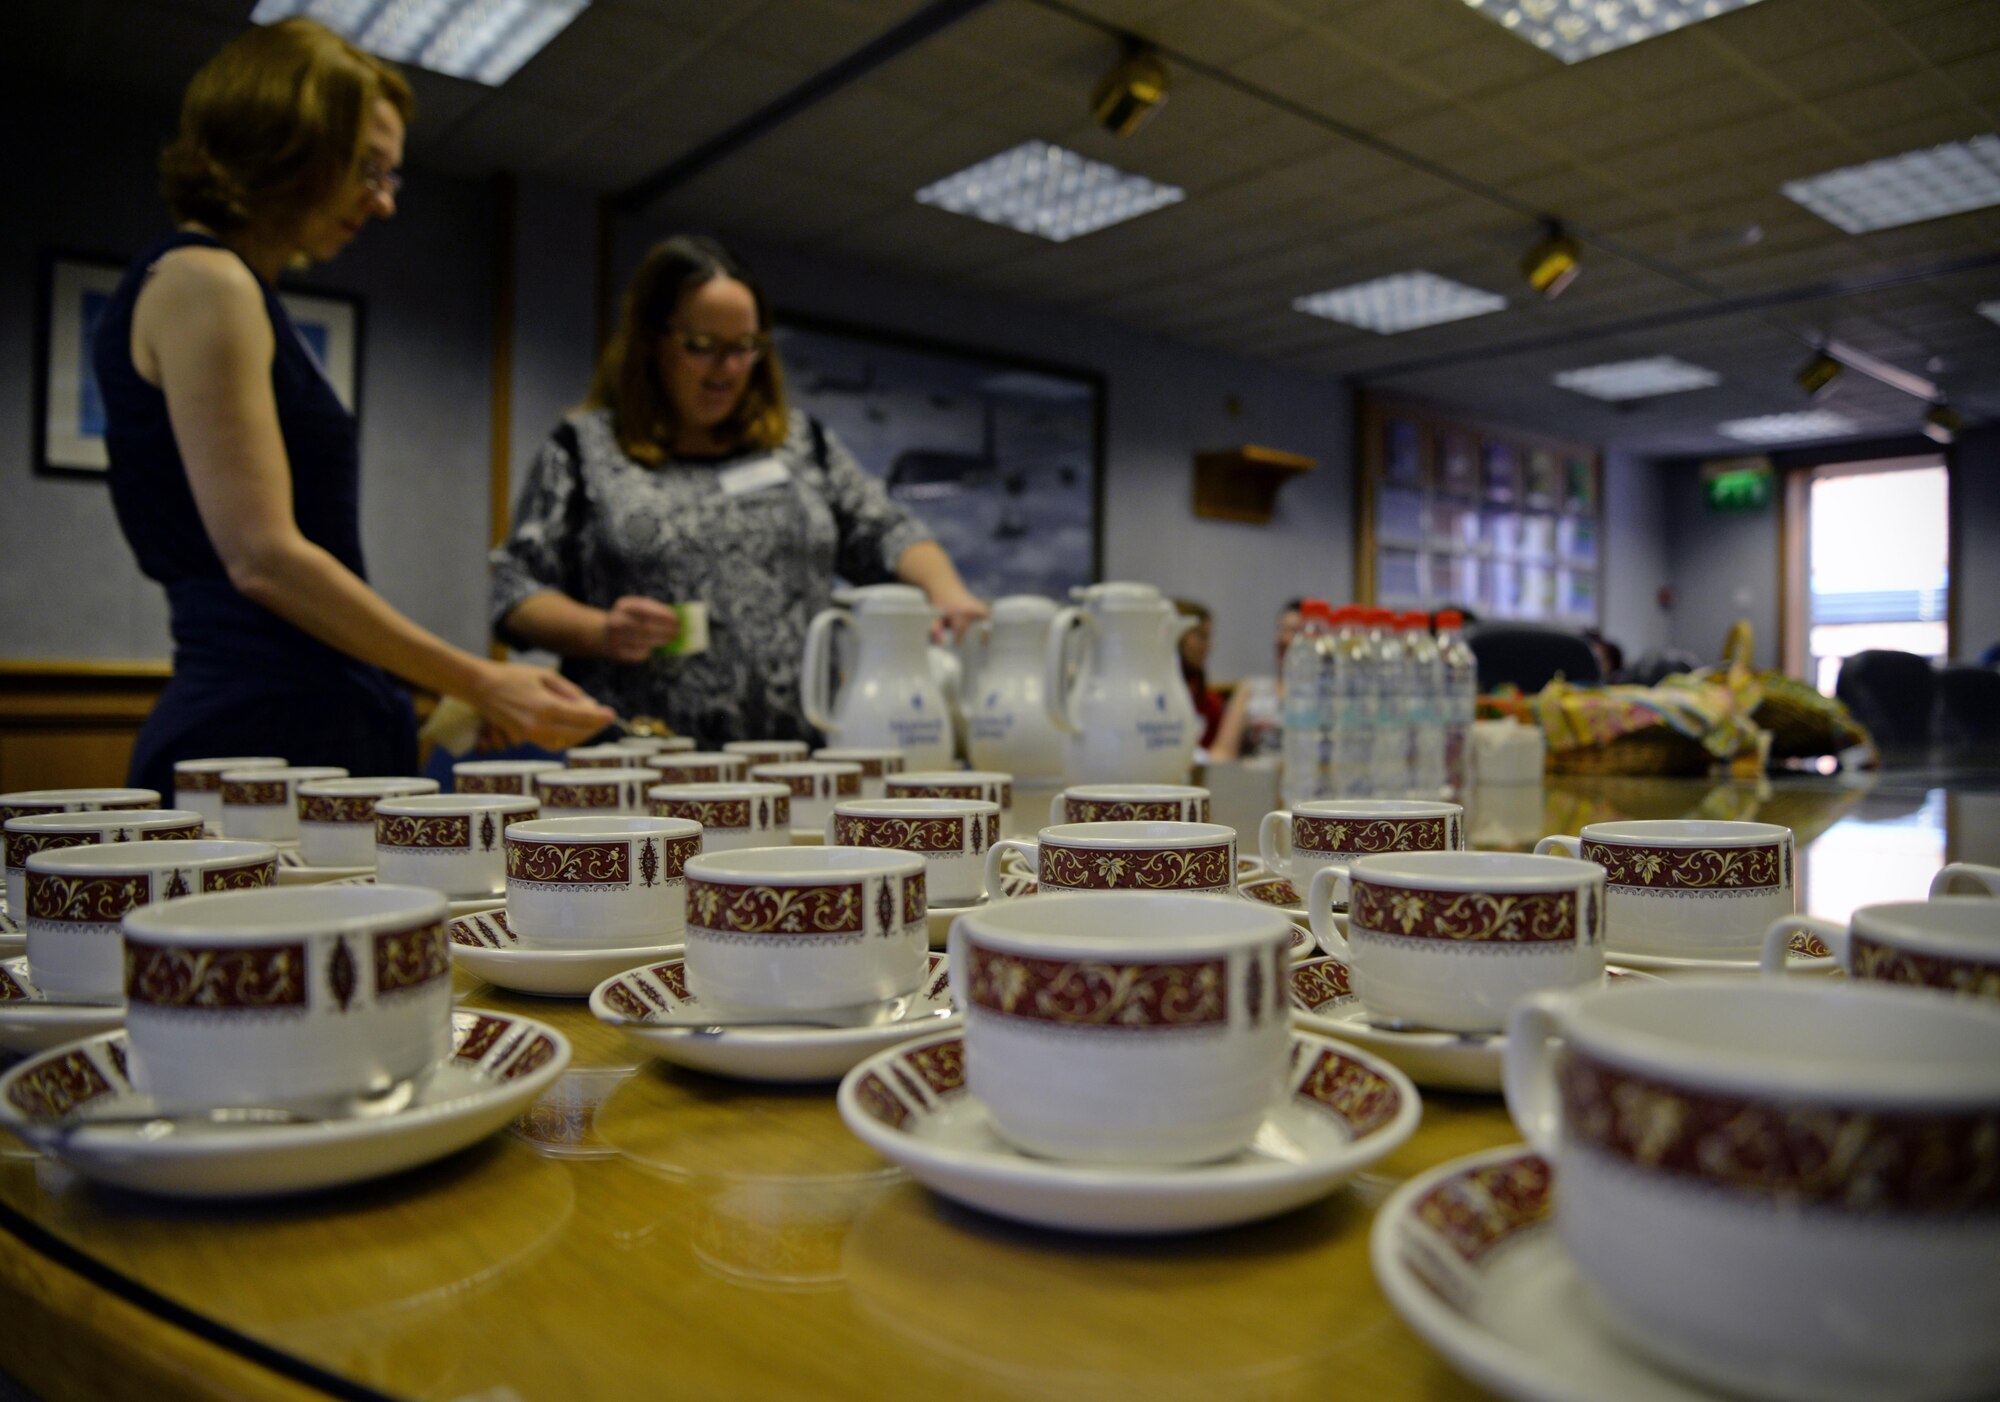 Spouses of U.S. Air Force members were treated to tea and scones in the 100th Air Refueling Wing conference room Sept. 8, 2016, on RAF Mildenhall, England. The Spouse Immersion Tour gave Team Mildenhall spouses an opportunity to network and gain a better understanding of programs and facilities on base.  (U.S. Air Force photo by Senior Airman Christine Christine Halan)